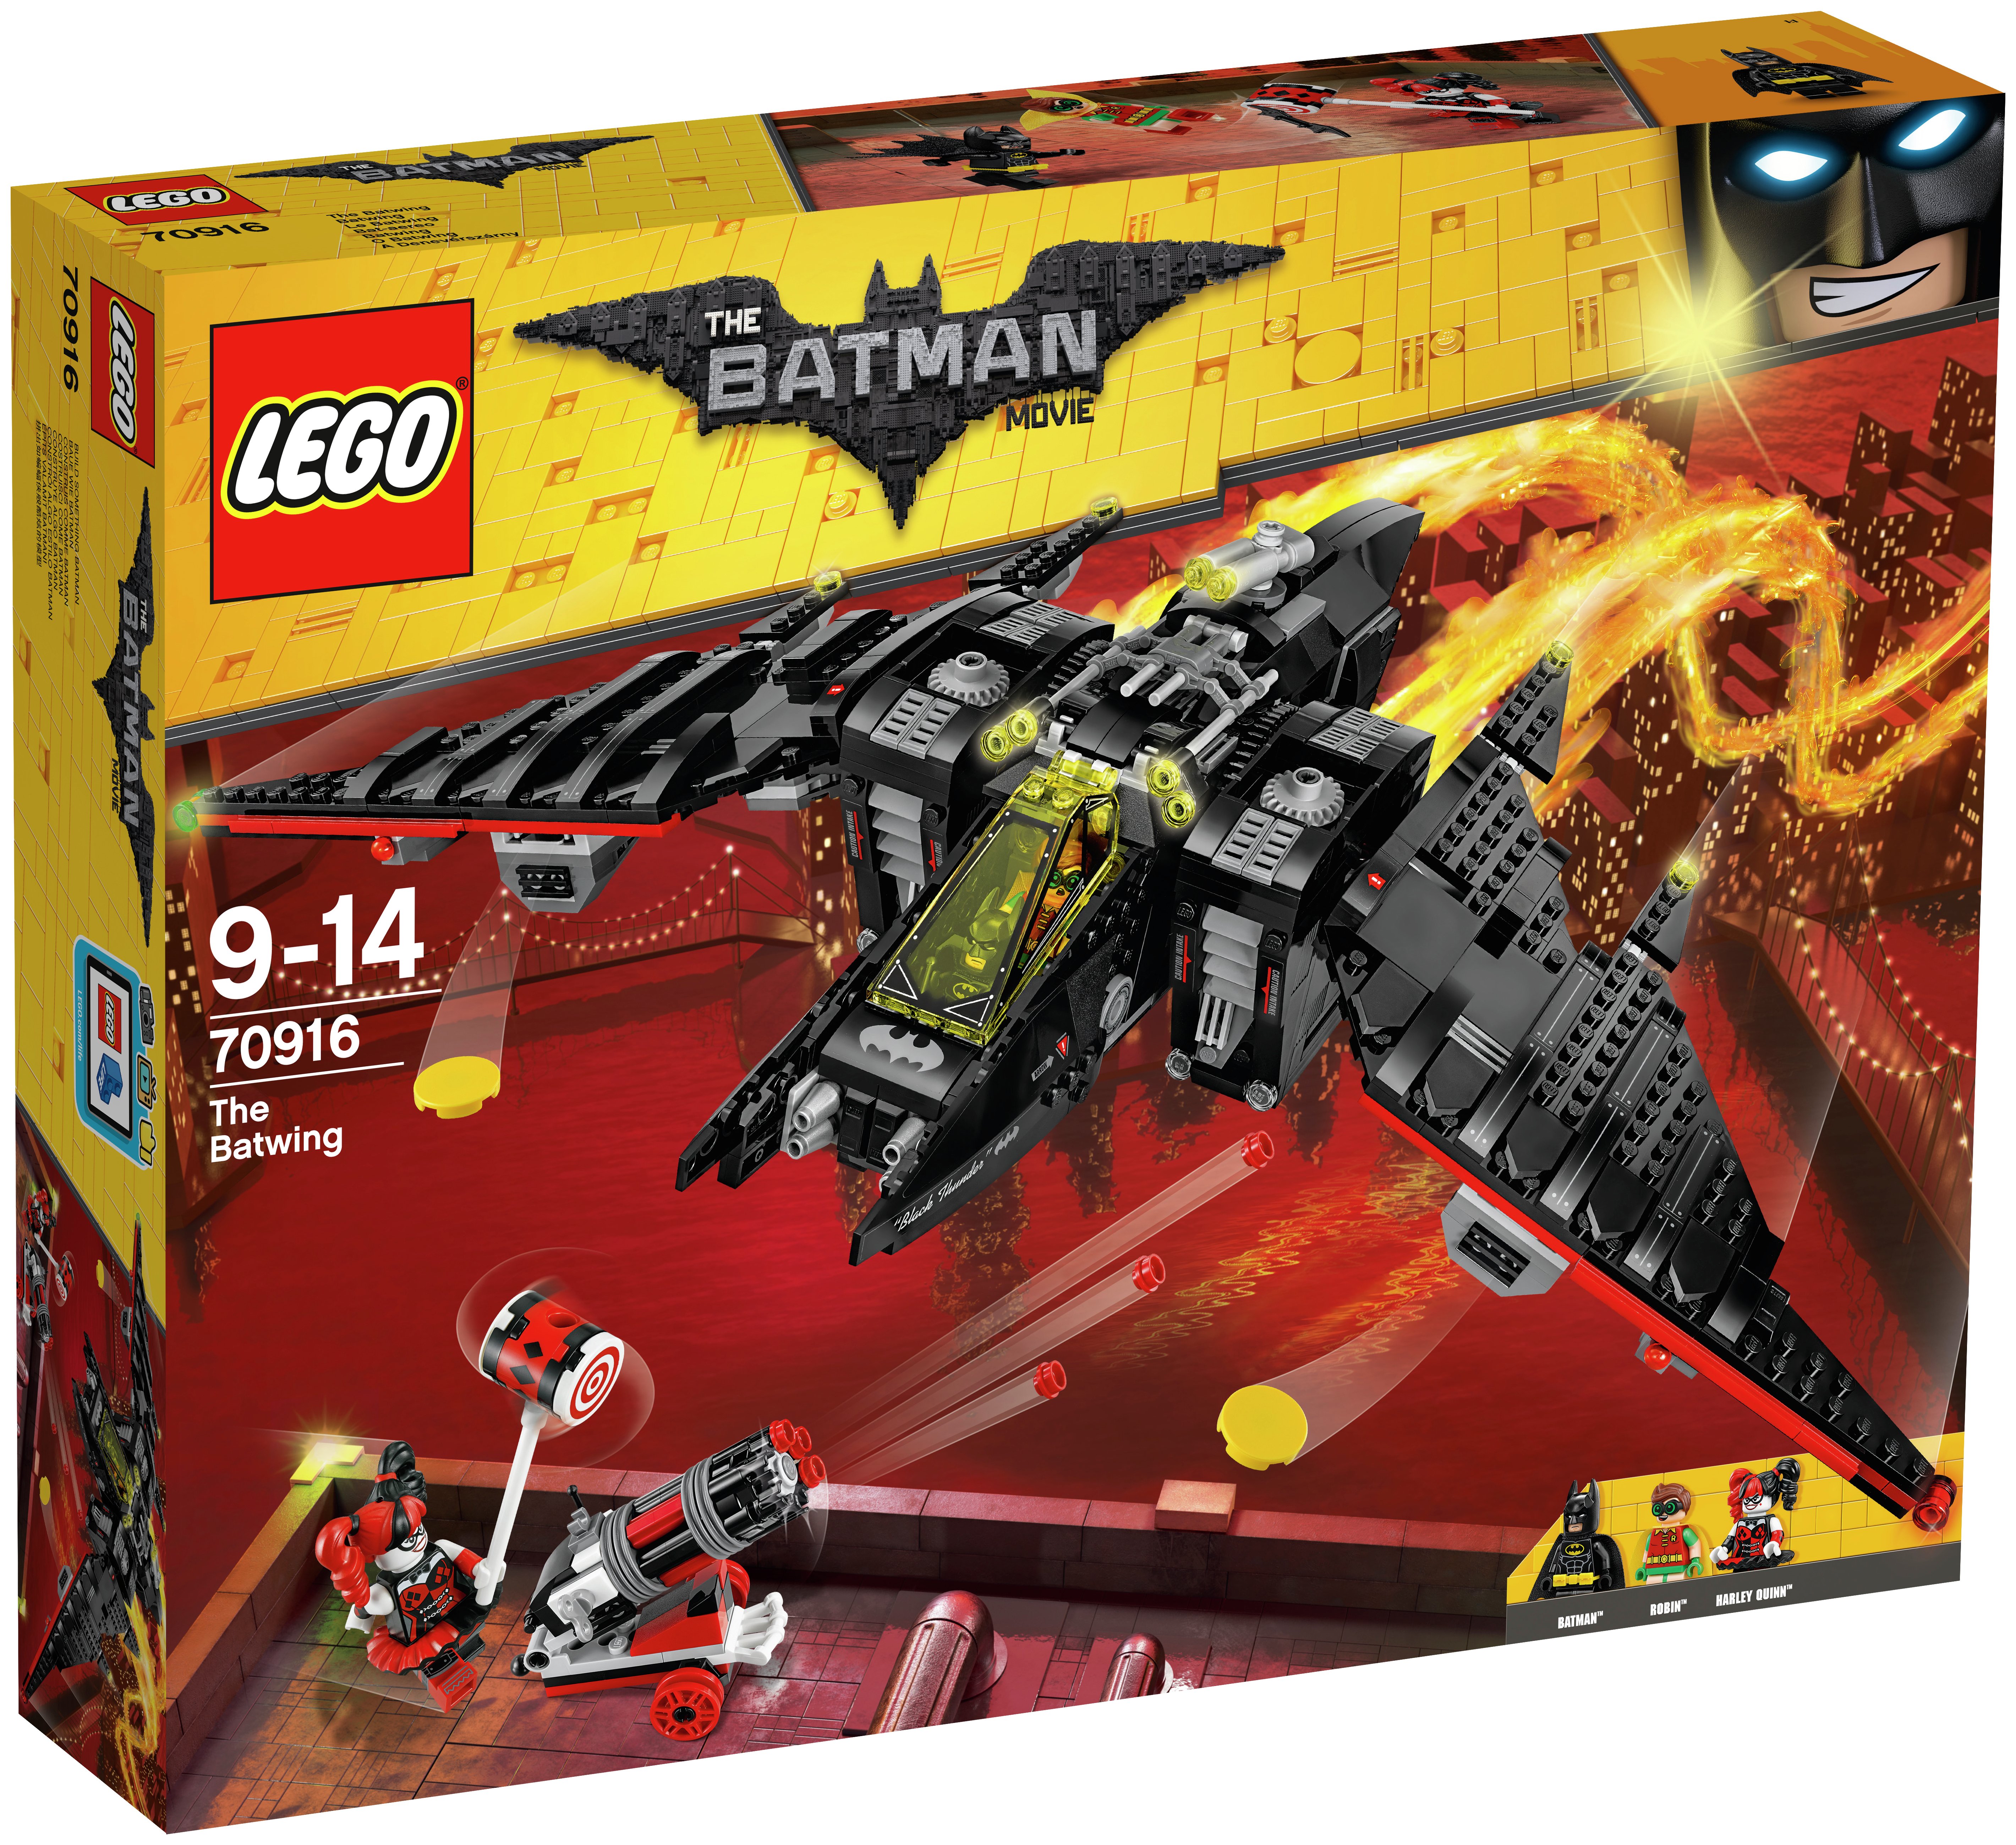 LEGO Bat Movie Batwing Vehicle - 70916 Review